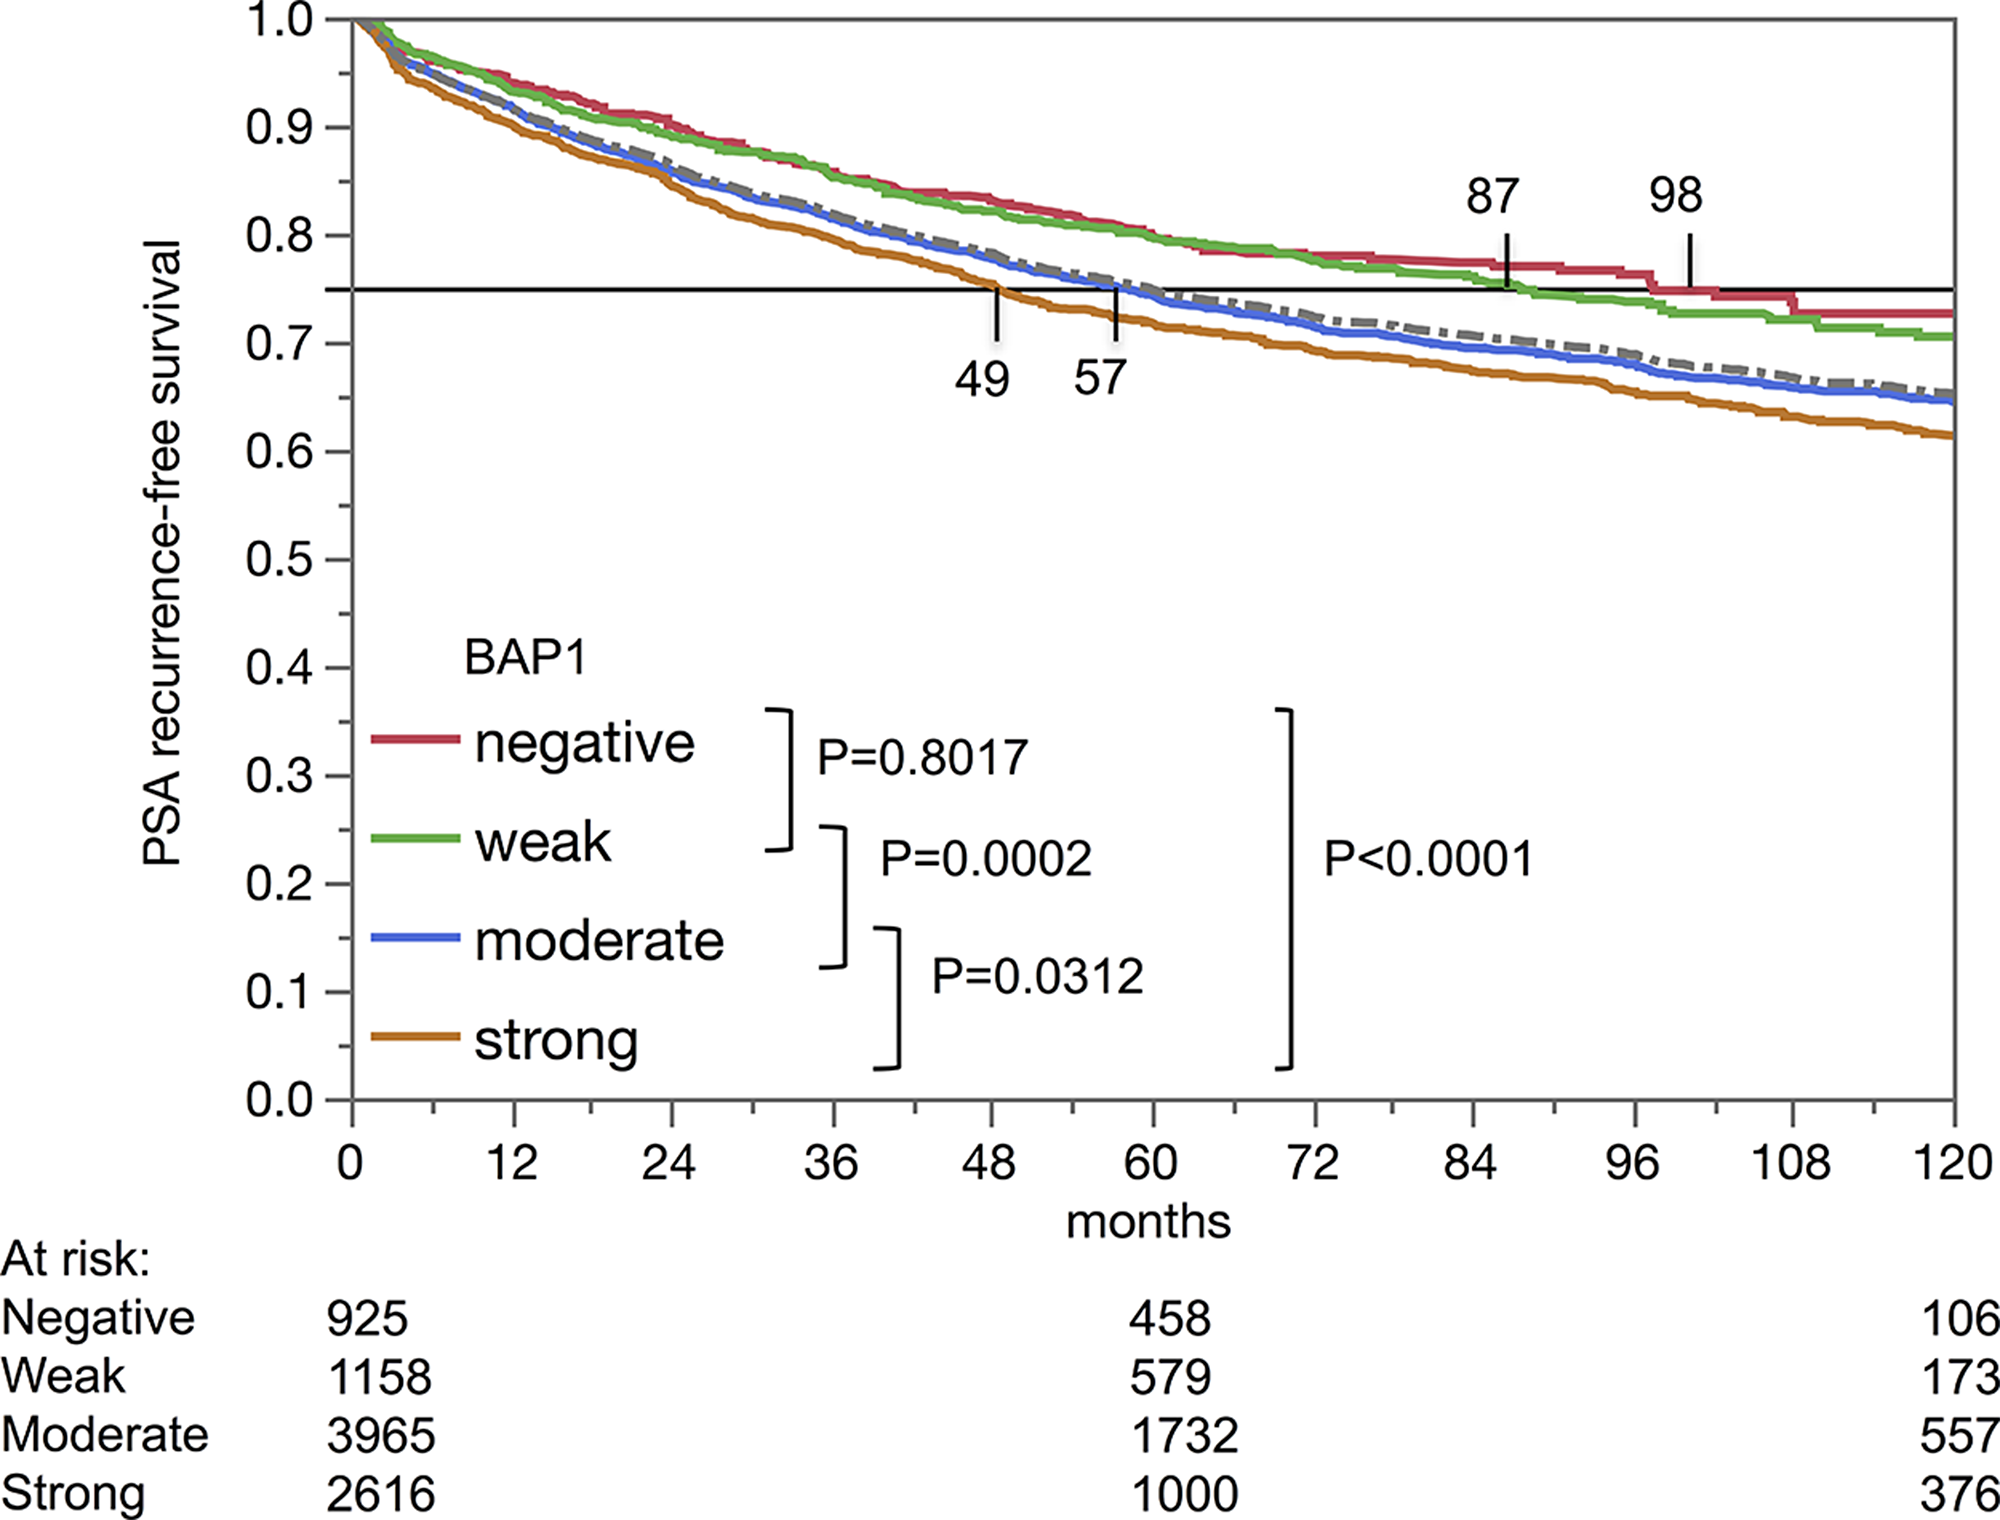 Kaplan-Meier analysis of PSA recurrence-free survival after prostatectomy and BAP1 staining.